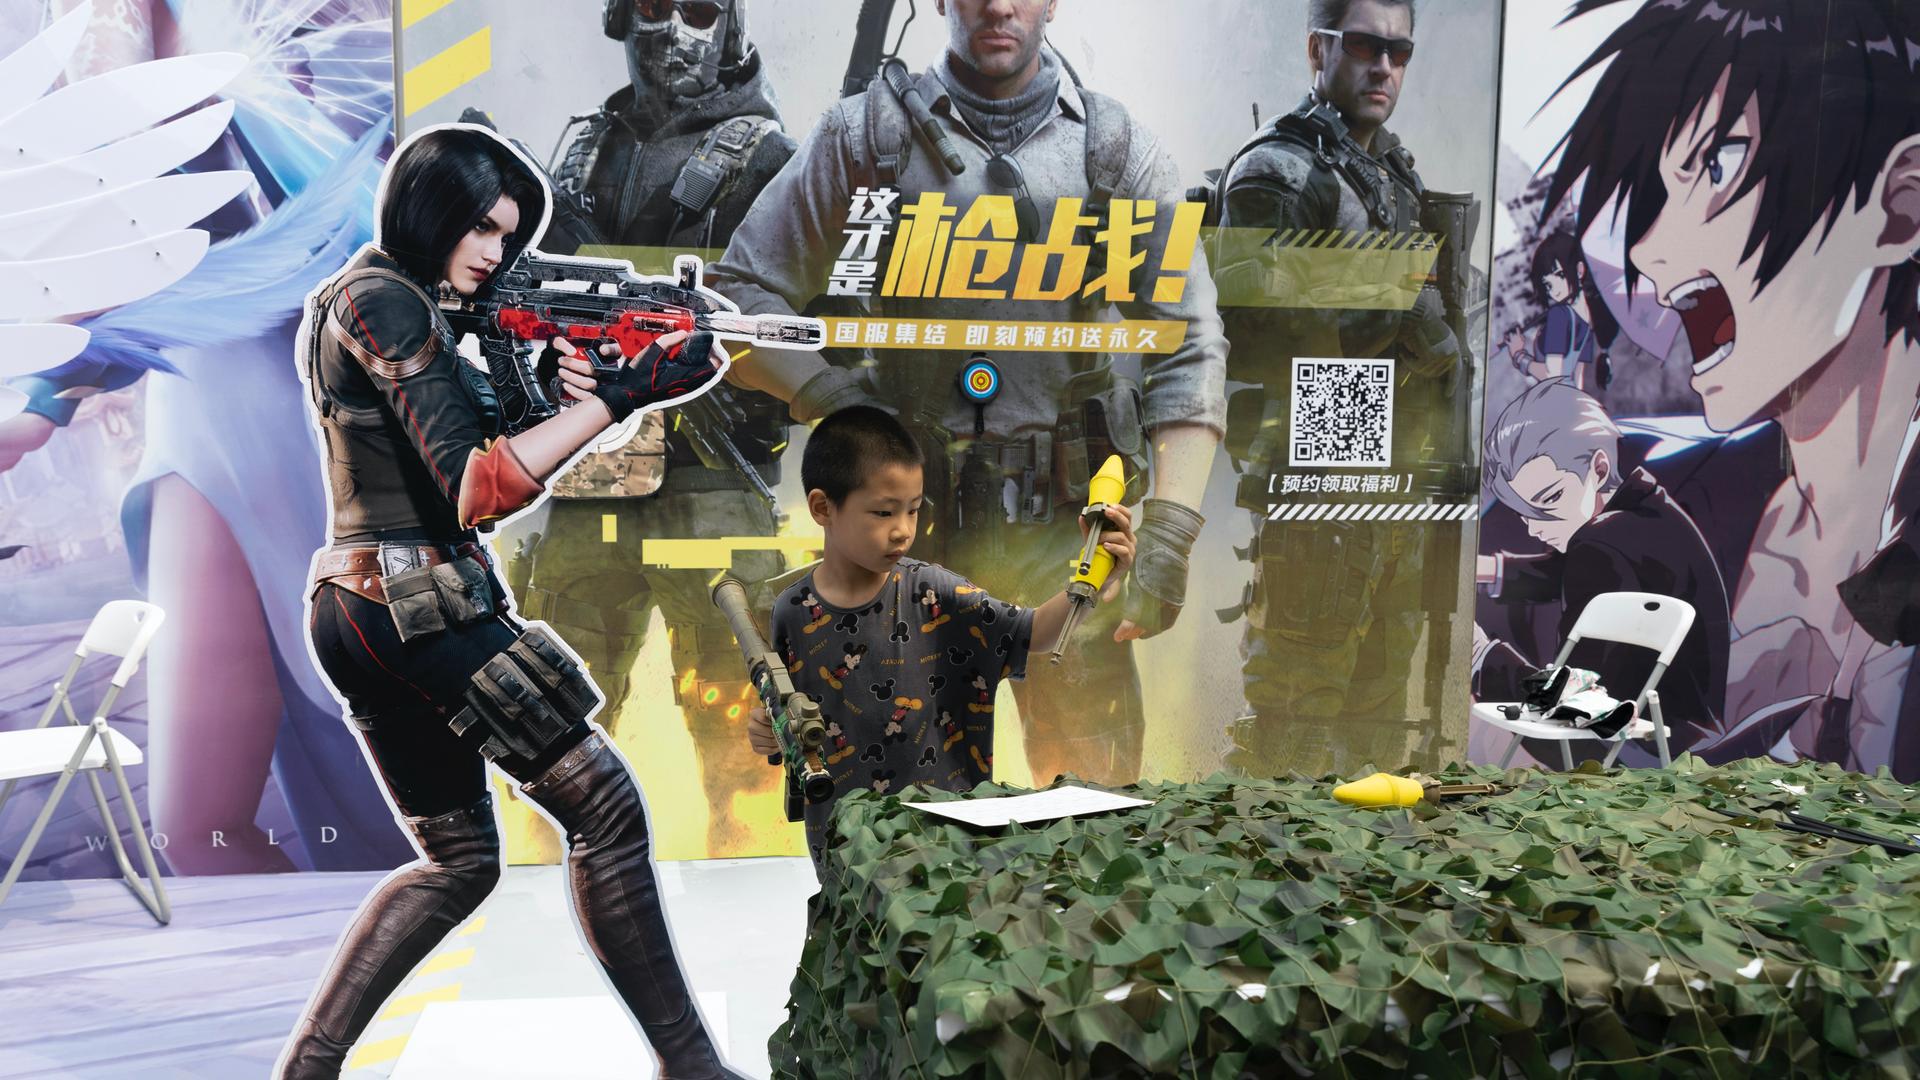 A child plays with a toy gun during a promotion for online games in Beijing on Aug. 29, 2020. China is banning children from playing online games for more than three hours a week, the harshest restriction so far on the game industry as Chinese regulators 